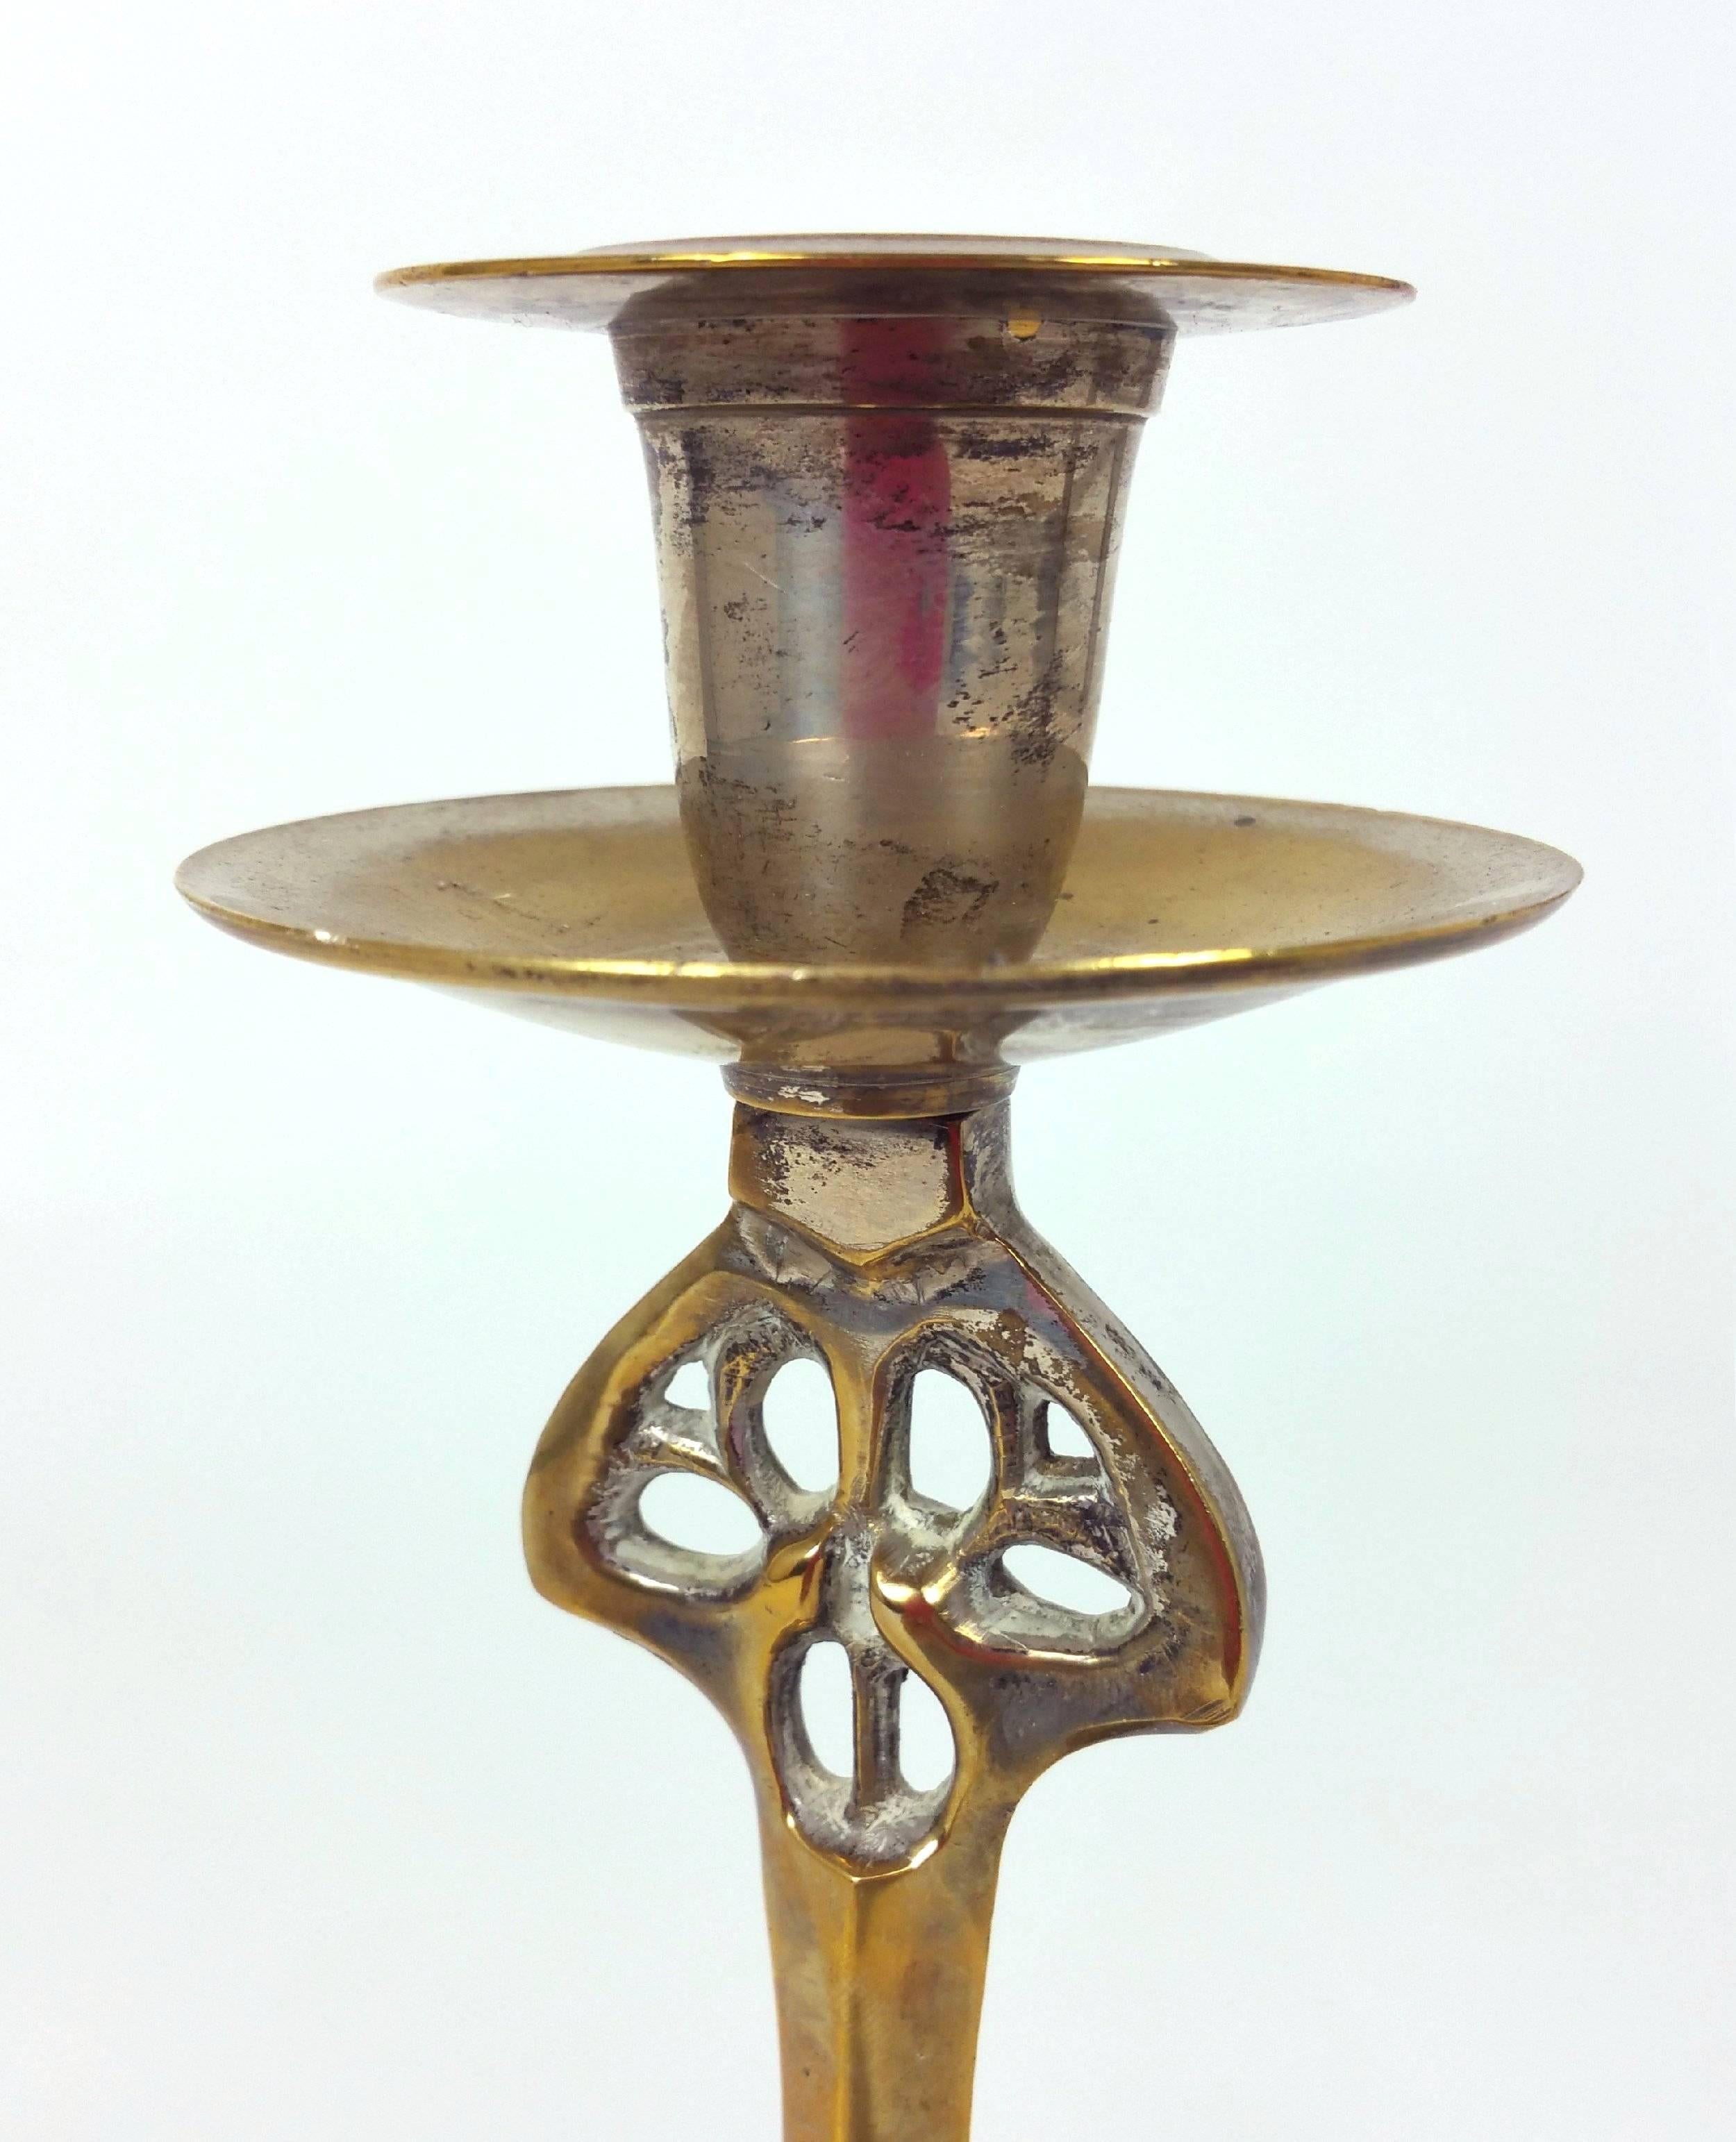 Pair of Art Nouveau 19th Century Brass Candlesticks In Excellent Condition For Sale In London, west Sussex